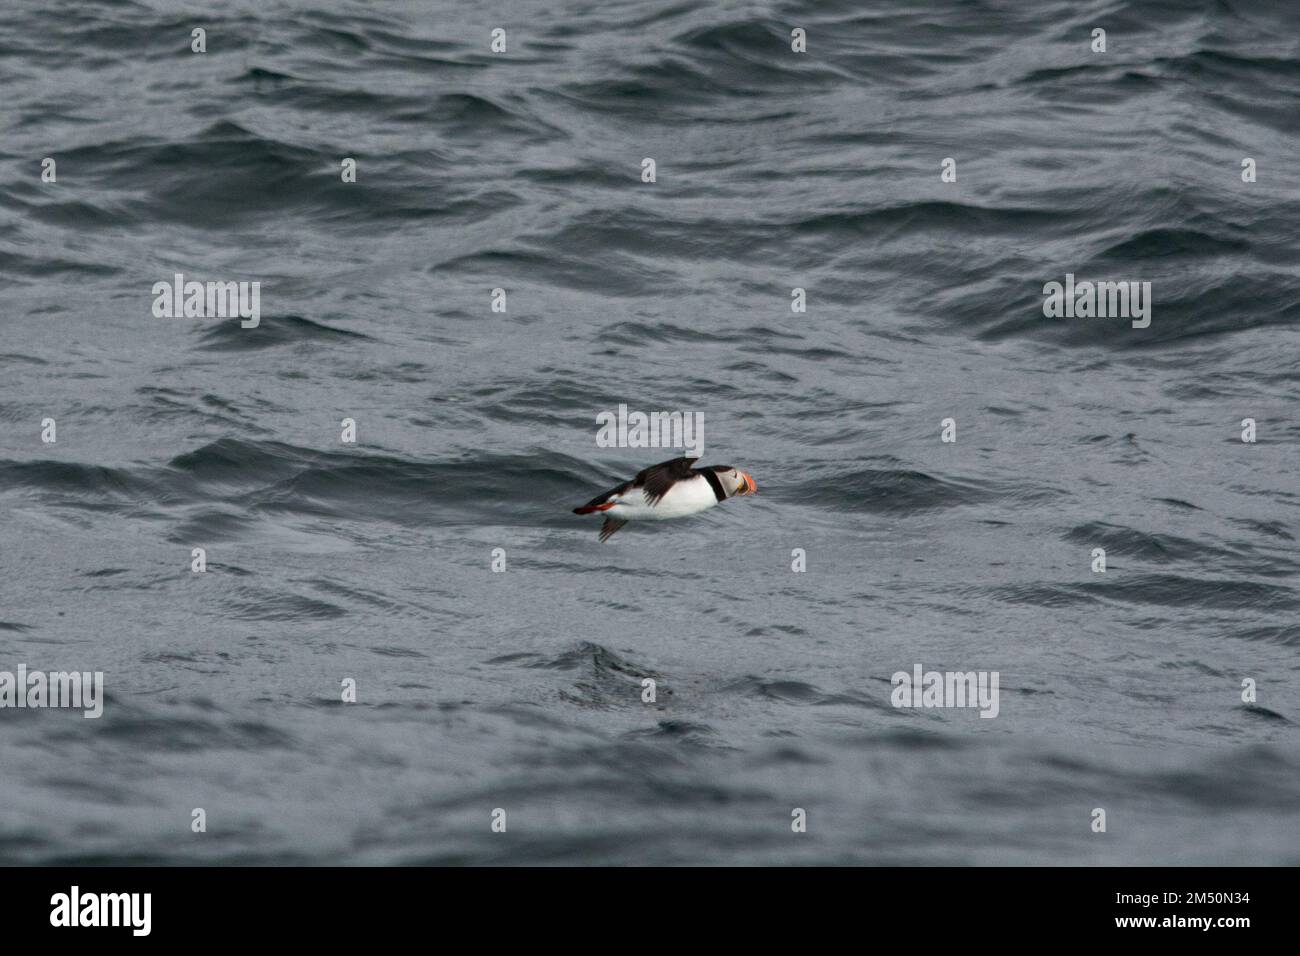 Atlantic Puffins flying over the waves of Norwegian Sea off the coast of Andøya Island in the Norwegian Sea. Stock Photo